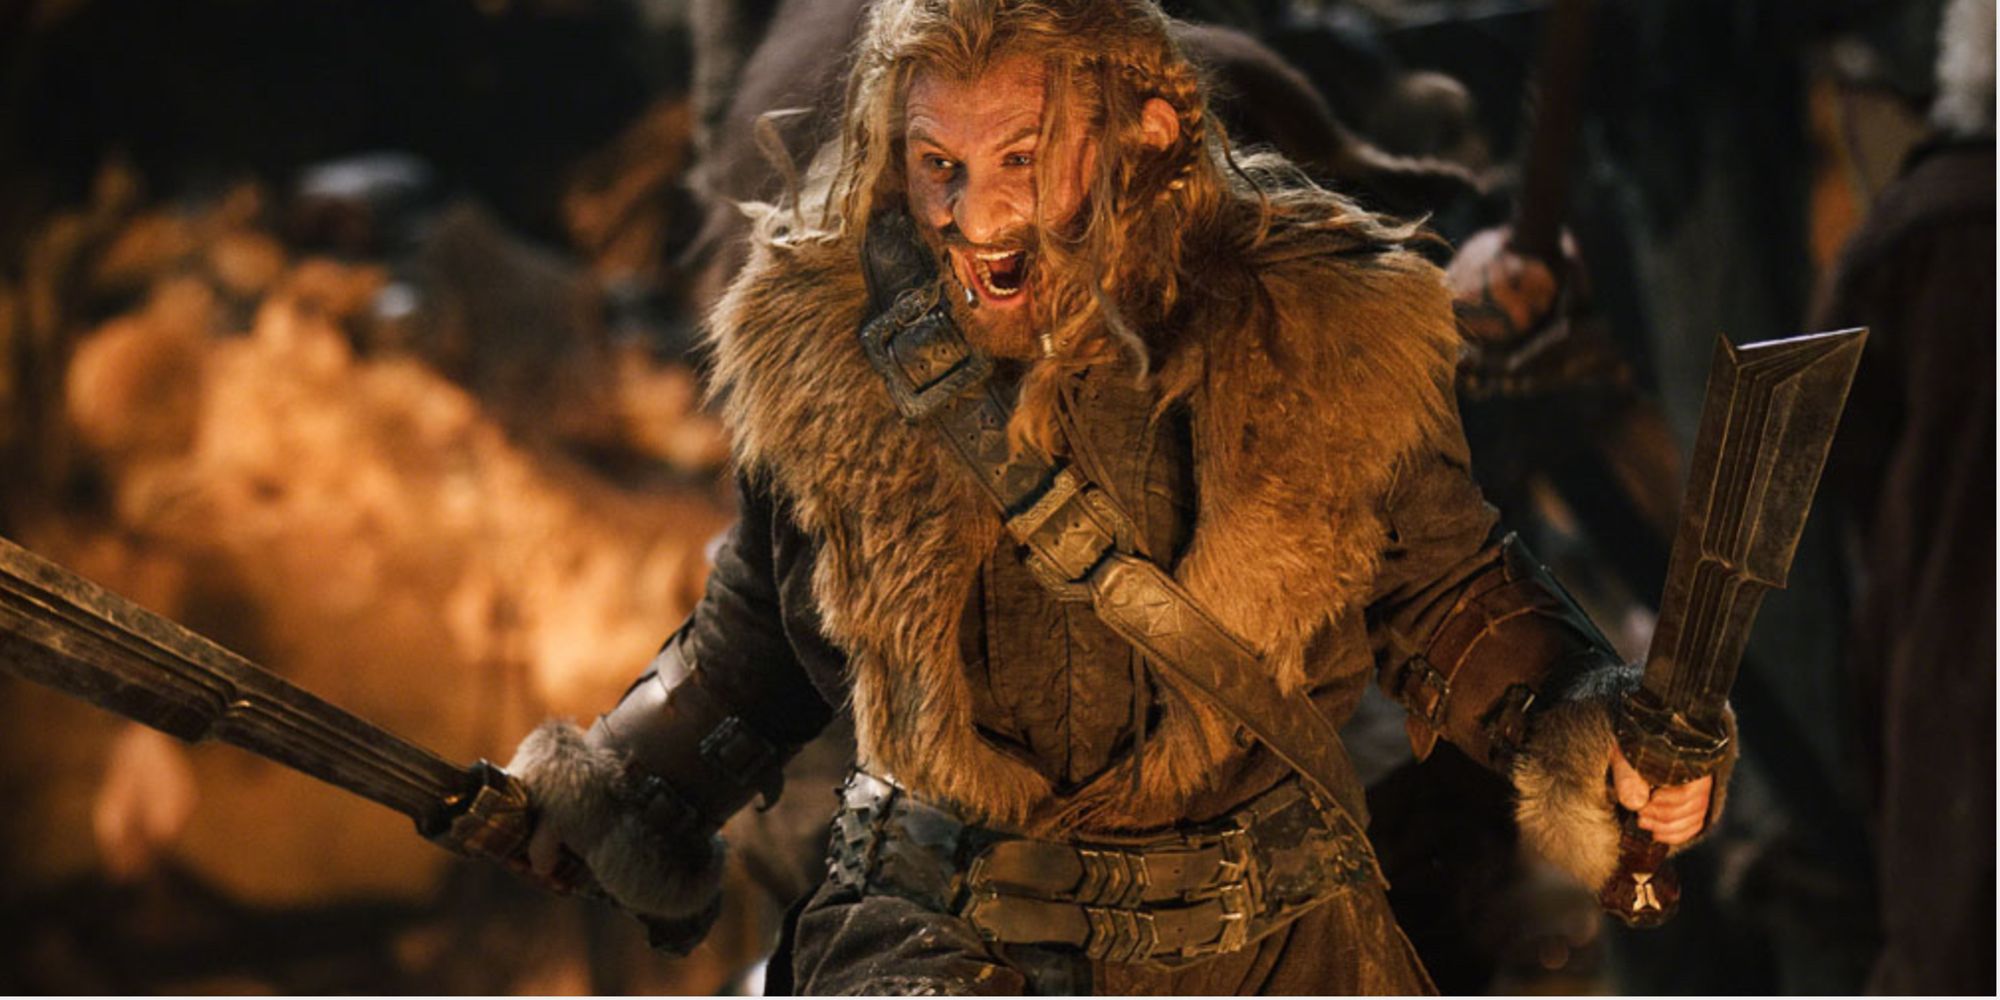 Fili on the battlefield in The Hobbit